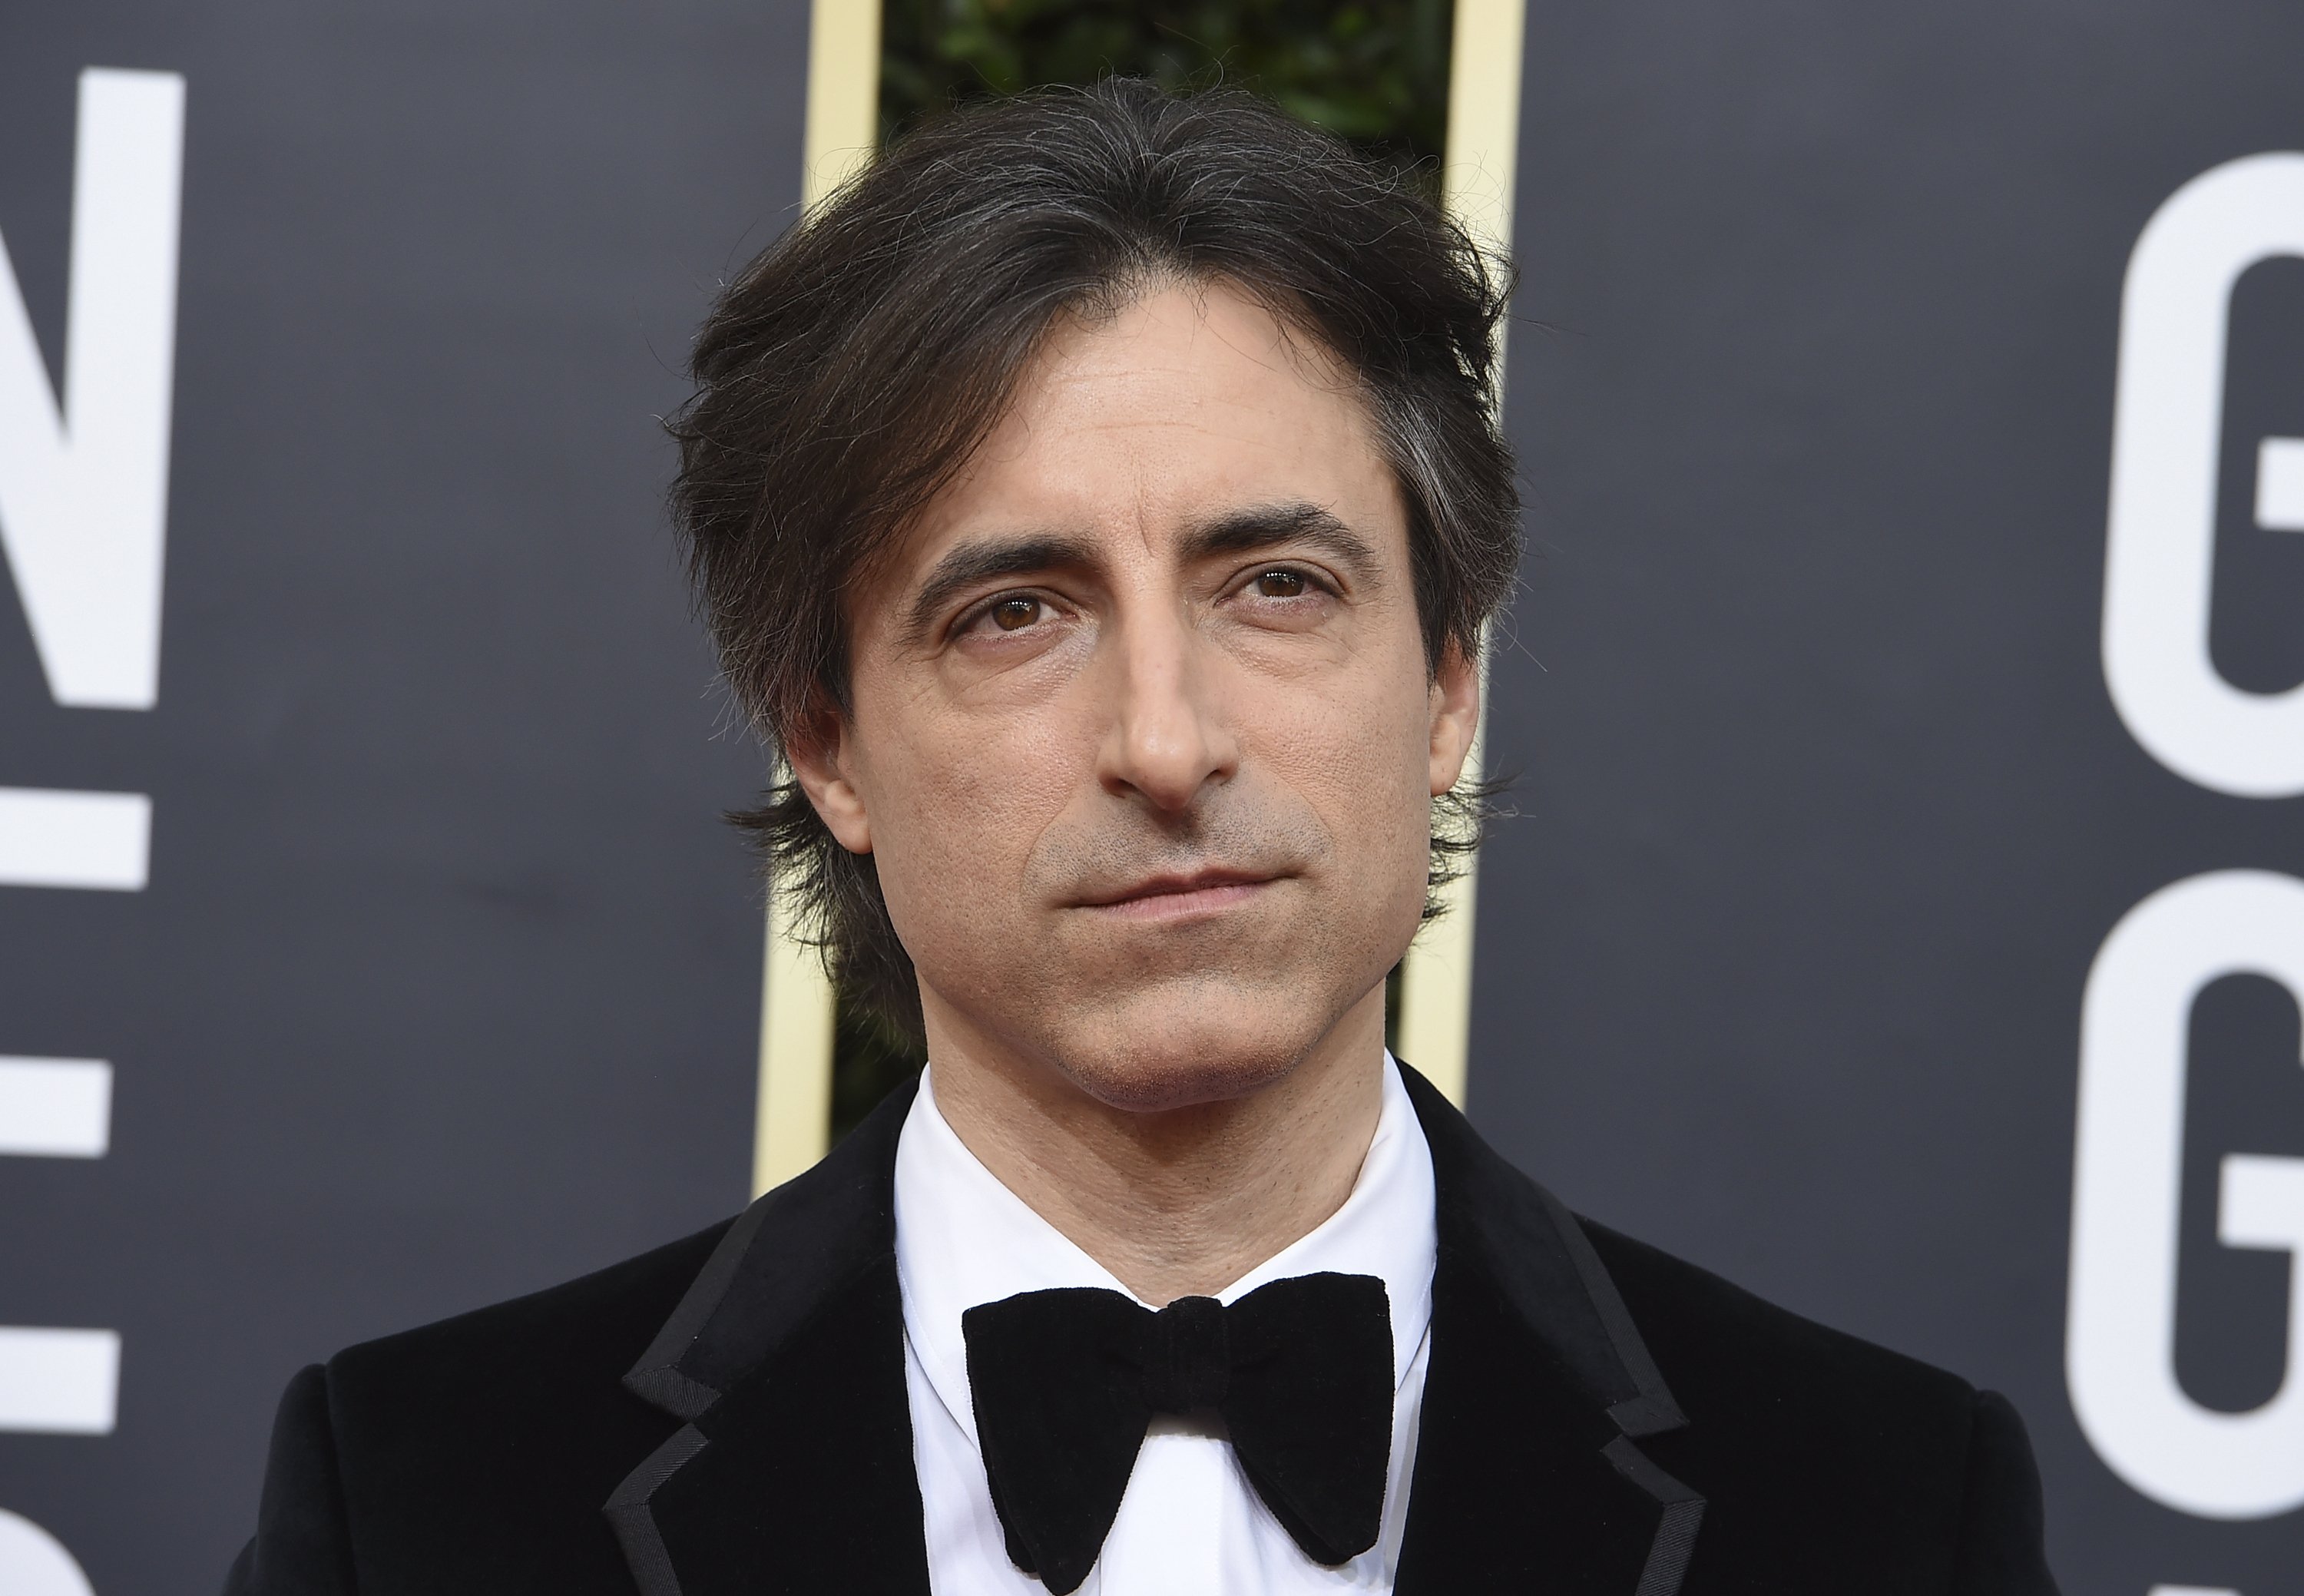 Noah Baumbach arrives at the 77th annual Golden Globe Awards at the Beverly Hilton Hotel in Beverly Hills, Calif., U.S., Sunday, Jan. 5, 2020. (AP)